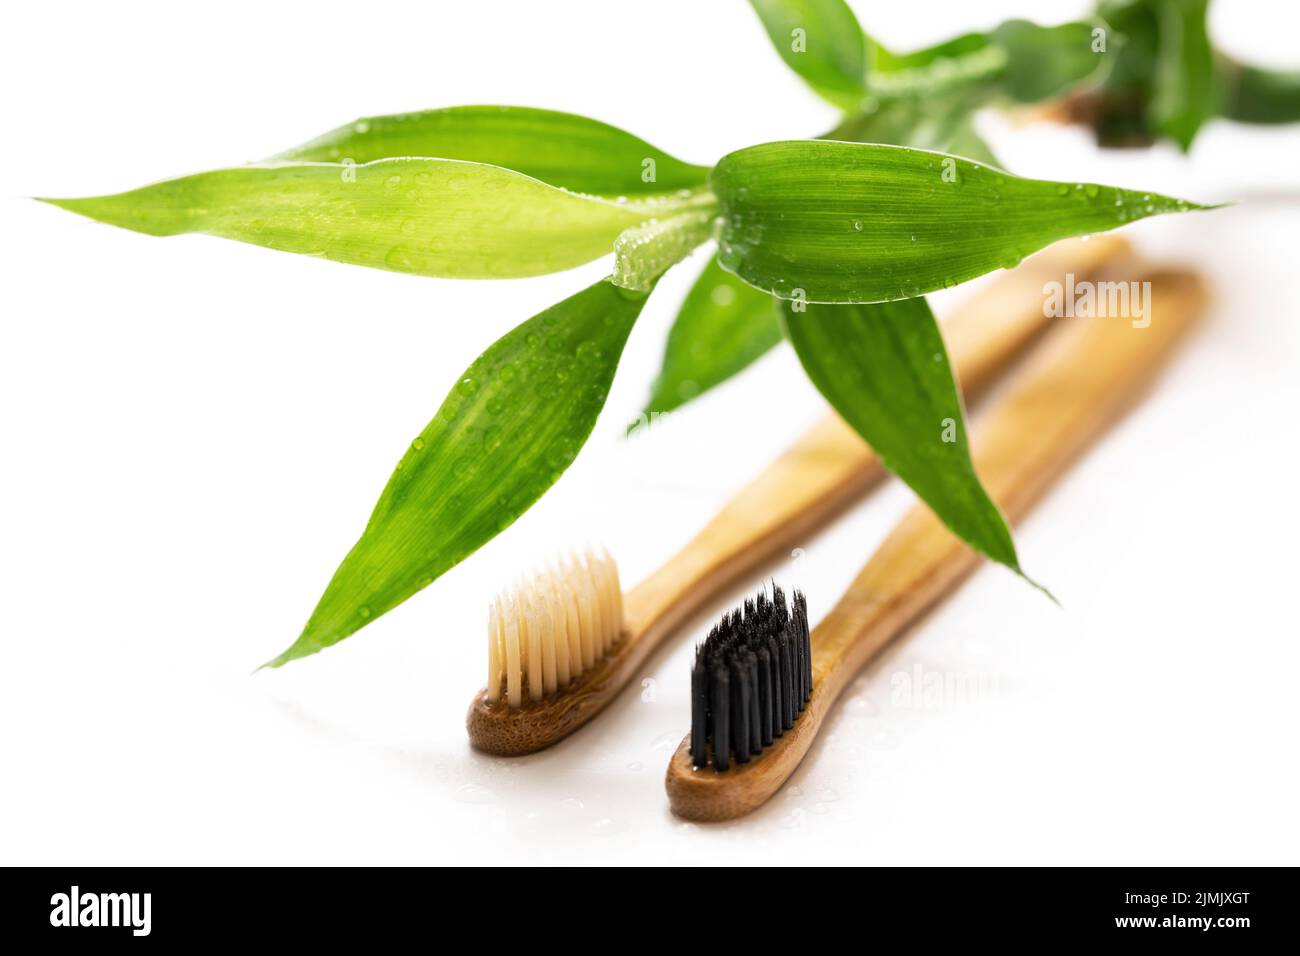 Eco friendly toothbrushes and bamboo plant on white Stock Photo